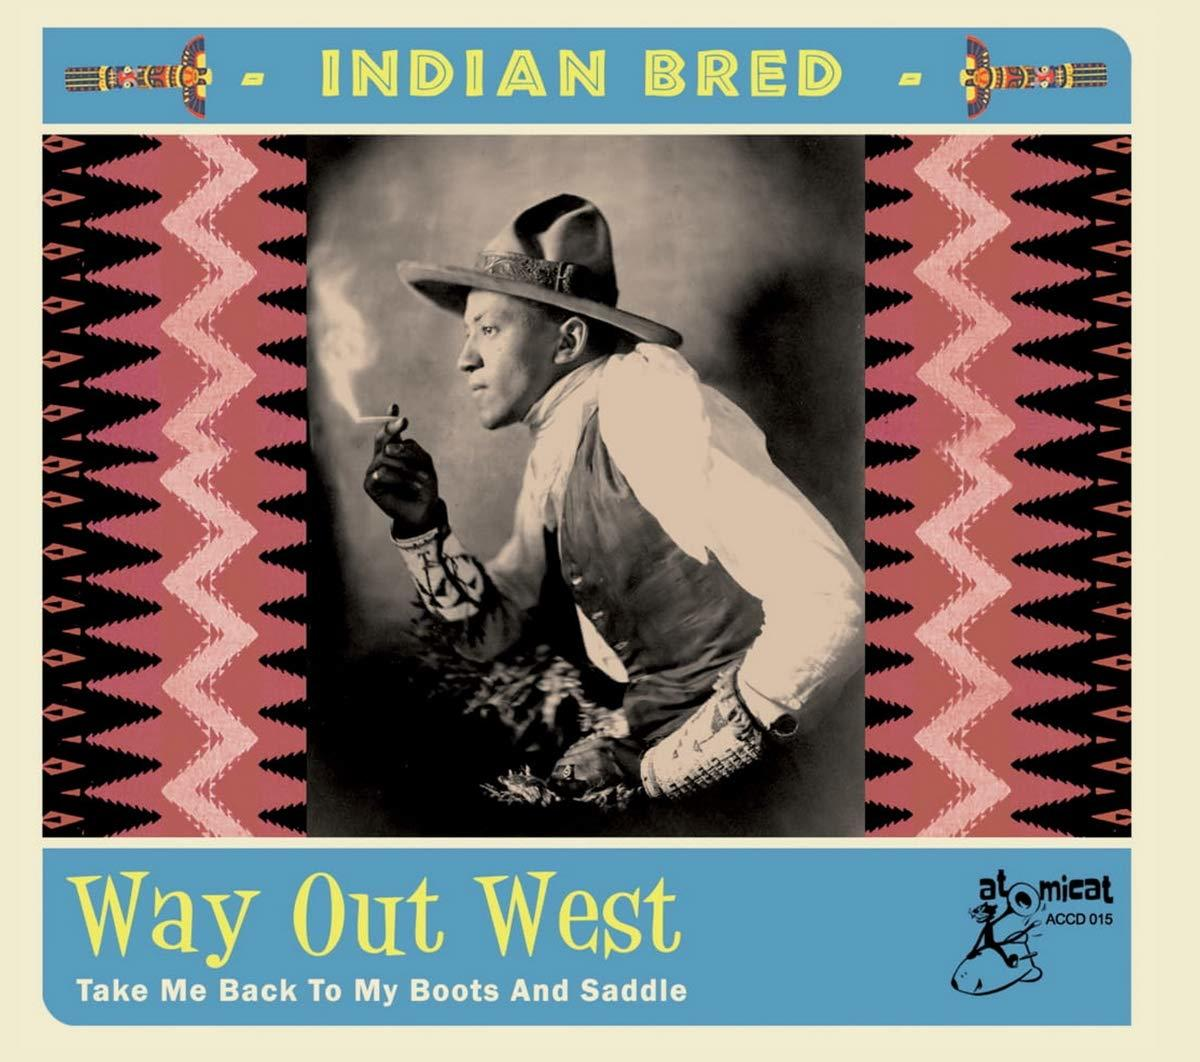 VARIOUS - Indian Bred-Way Out - (CD) West